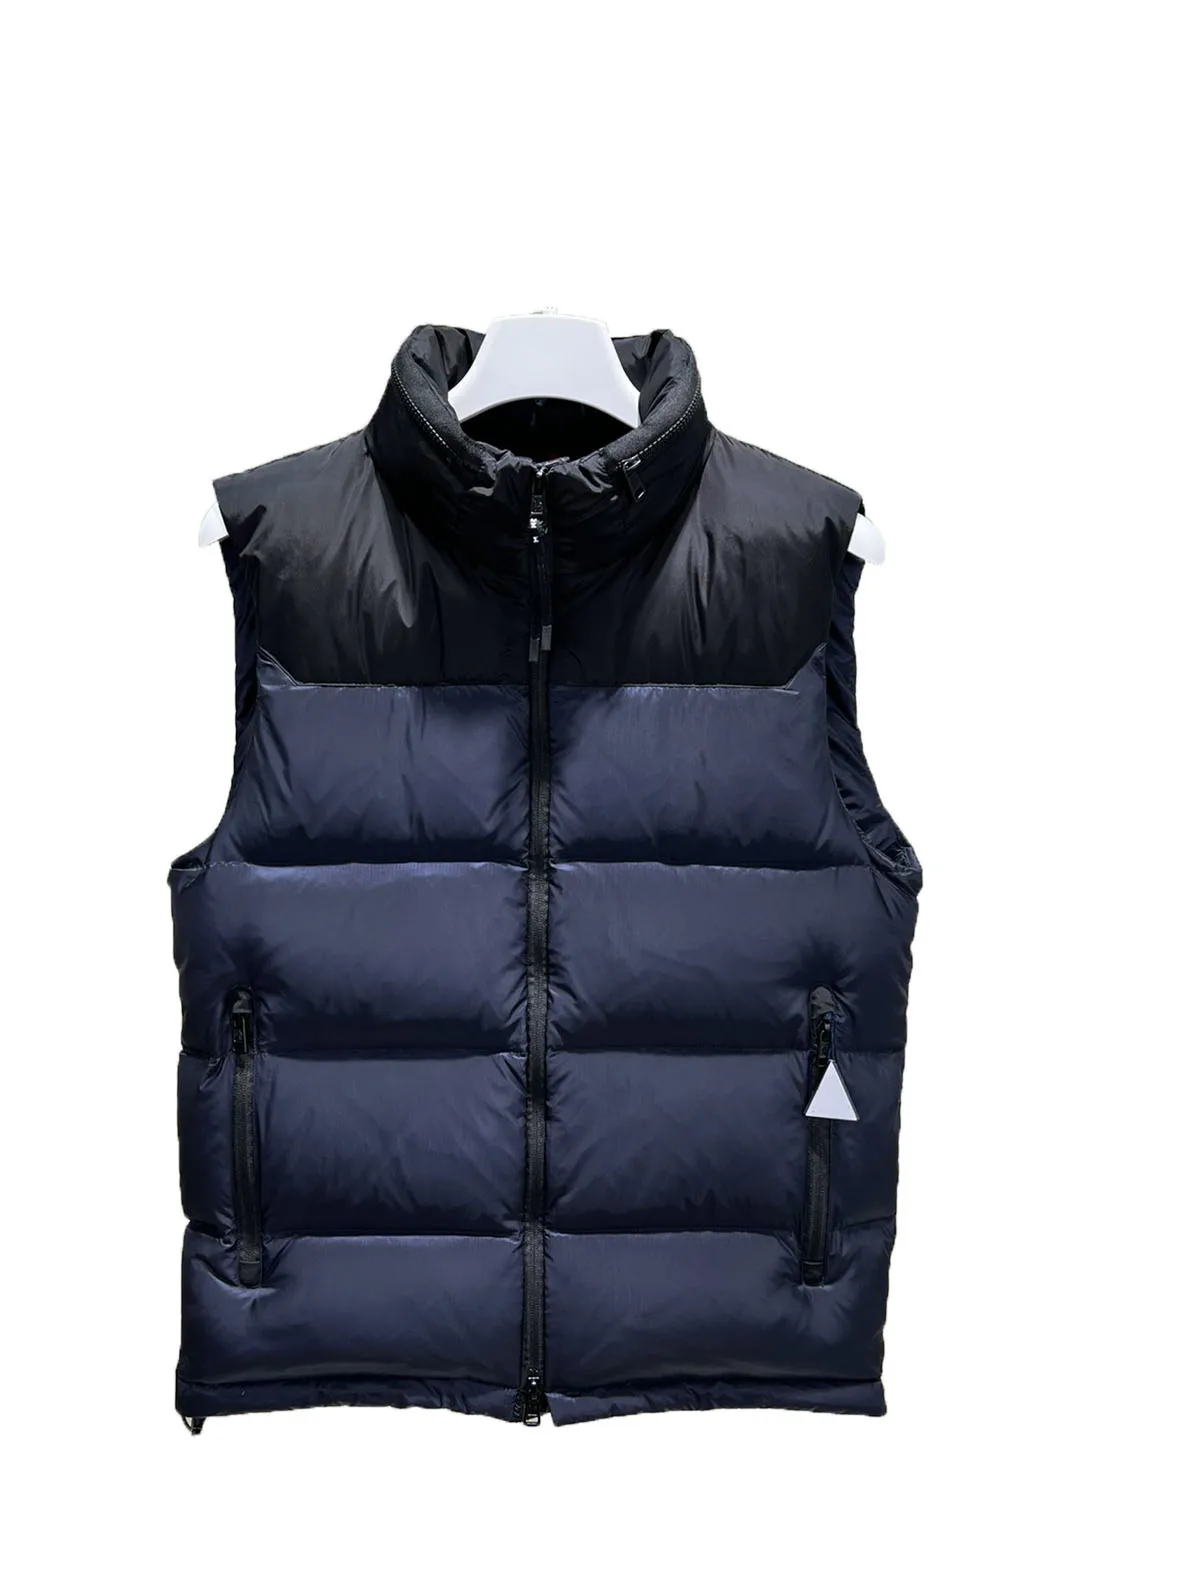 

Down jacket vest short section stand-up collar Slim version of solid color design warm and comfortable 2023 winter new 1021